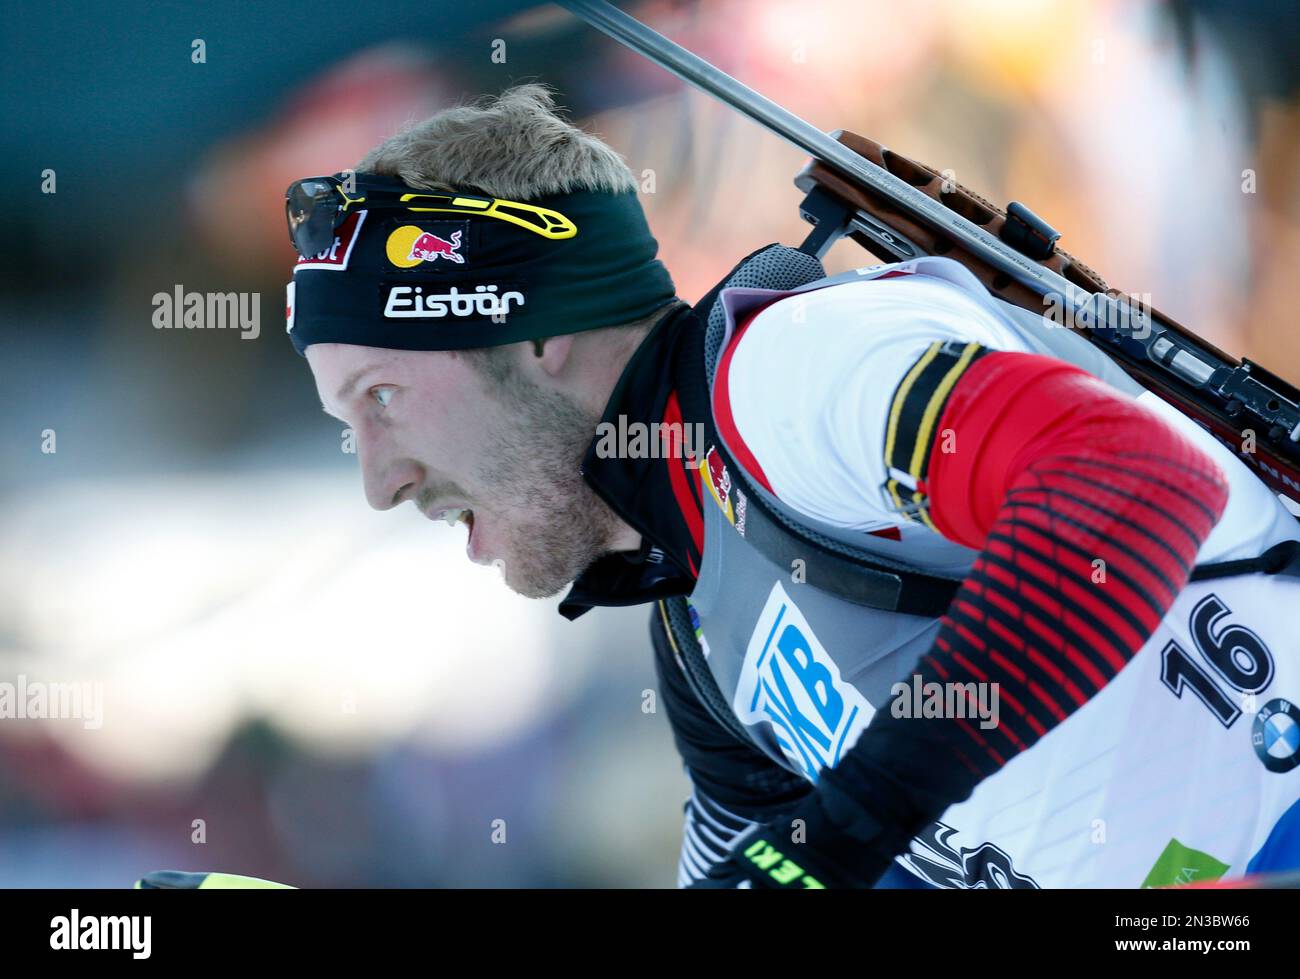 Austrias Dominik Landertinger competes to place second the mens 10 km sprint competition at the Biathlon World Cup event, in Pokljuka, Slovenia, Friday, Dec